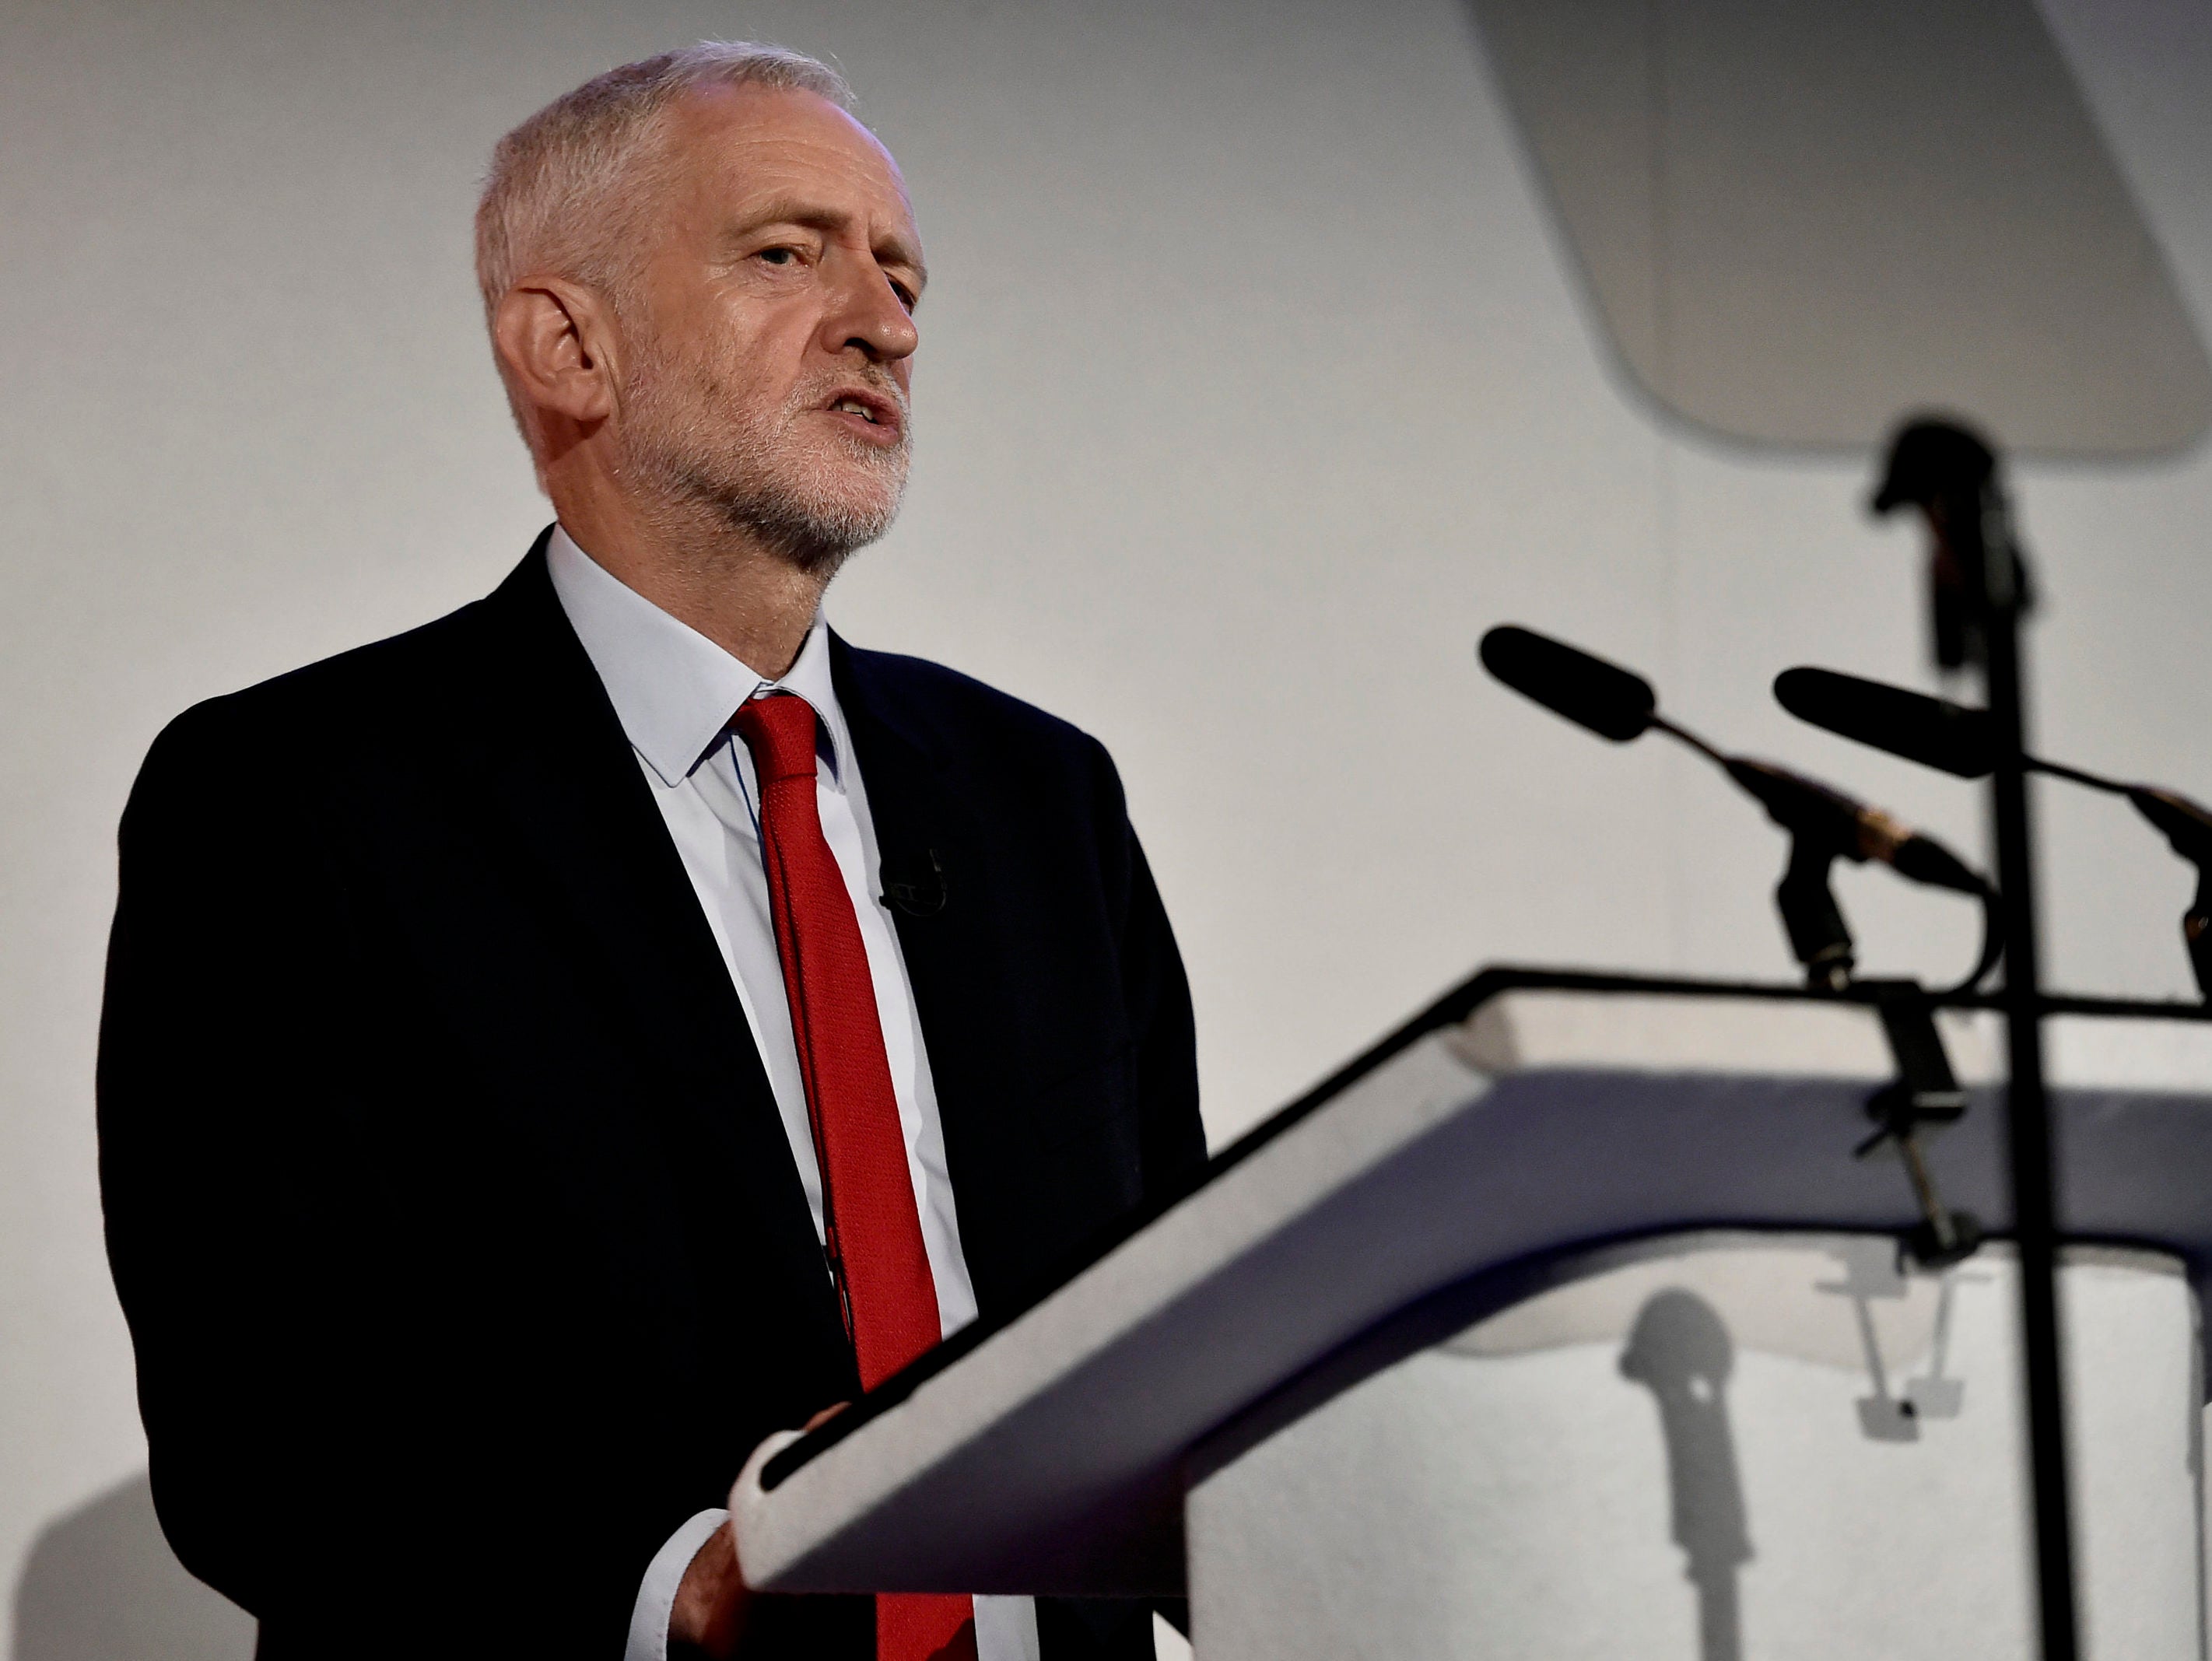 Corbyn calls for journalists to be 'set free' from 'billionaire' press barons as he proposes 'public interest media fund' and editorial elections